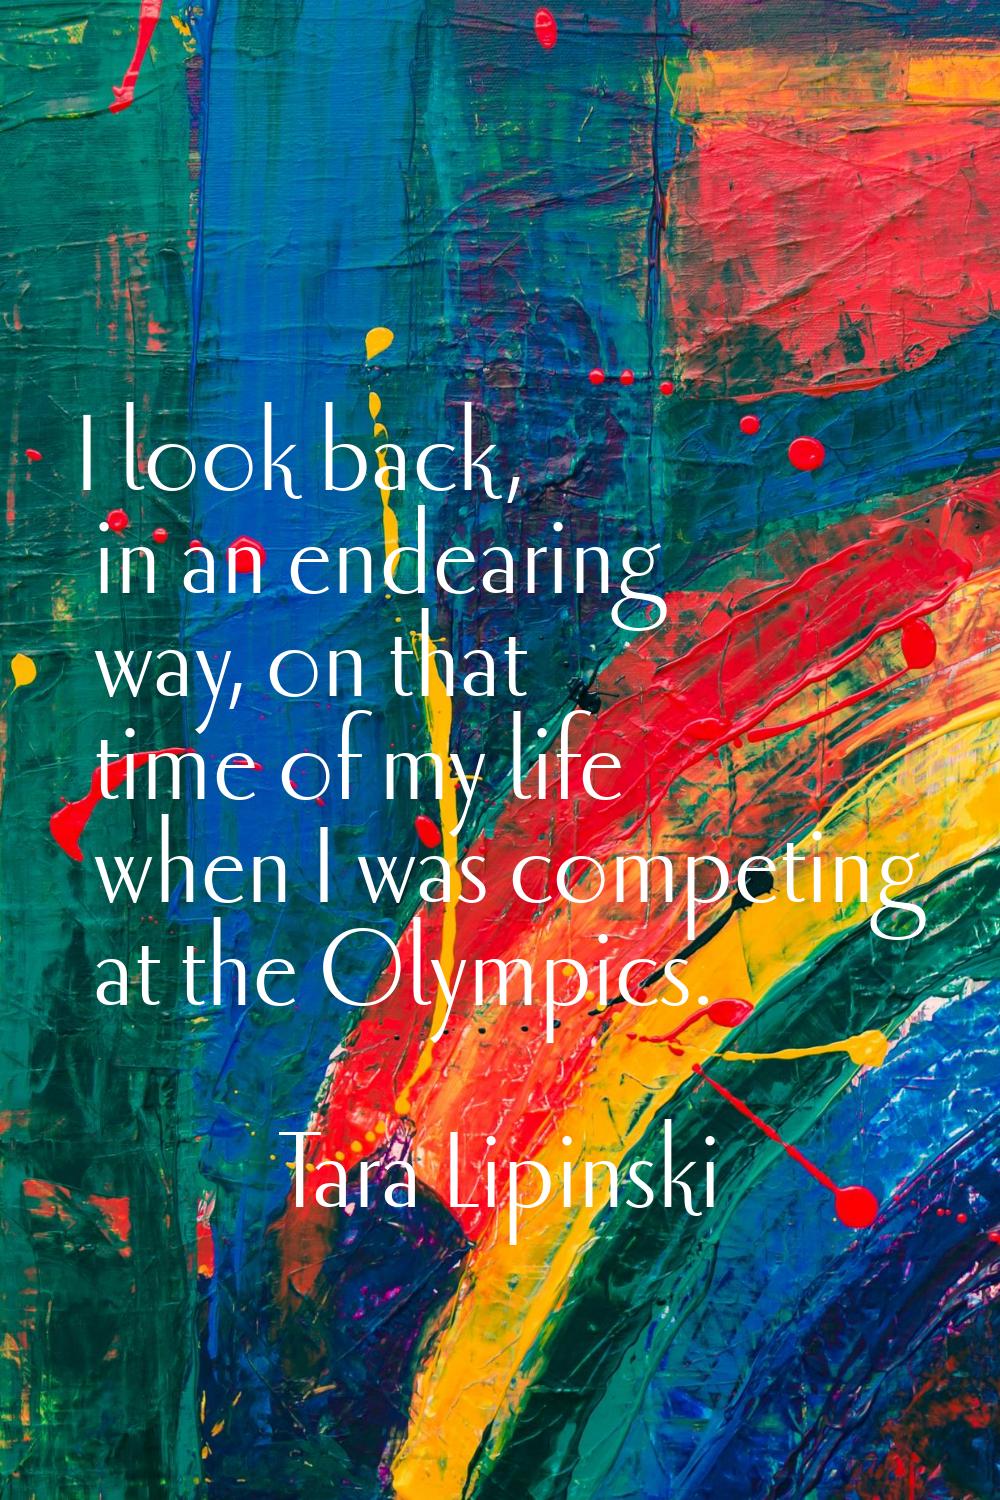 I look back, in an endearing way, on that time of my life when I was competing at the Olympics.